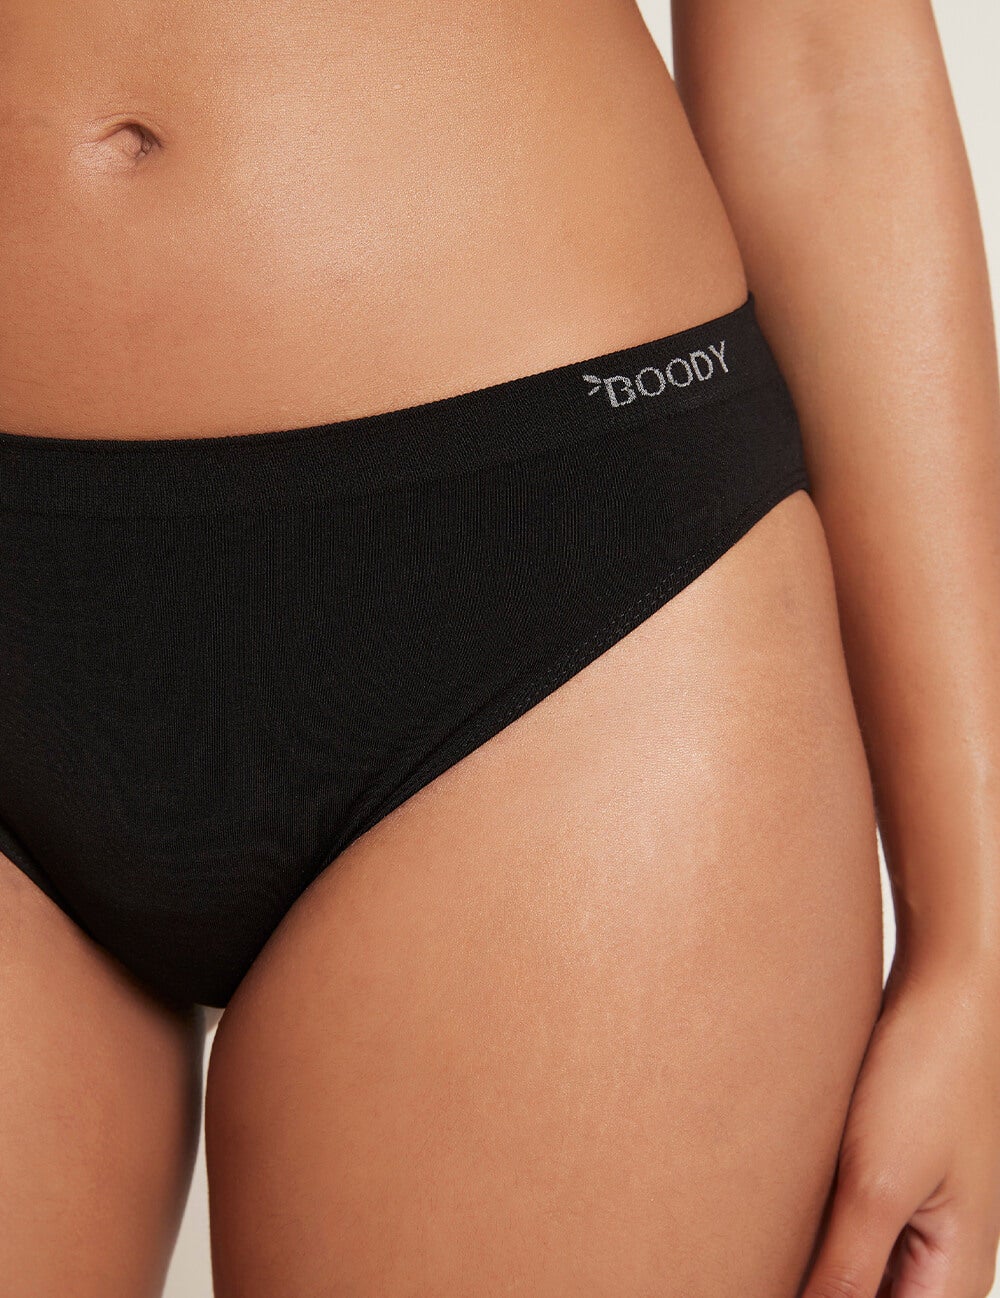 Are Cotton Knickers The Best To Keep Cool? » Chaffree